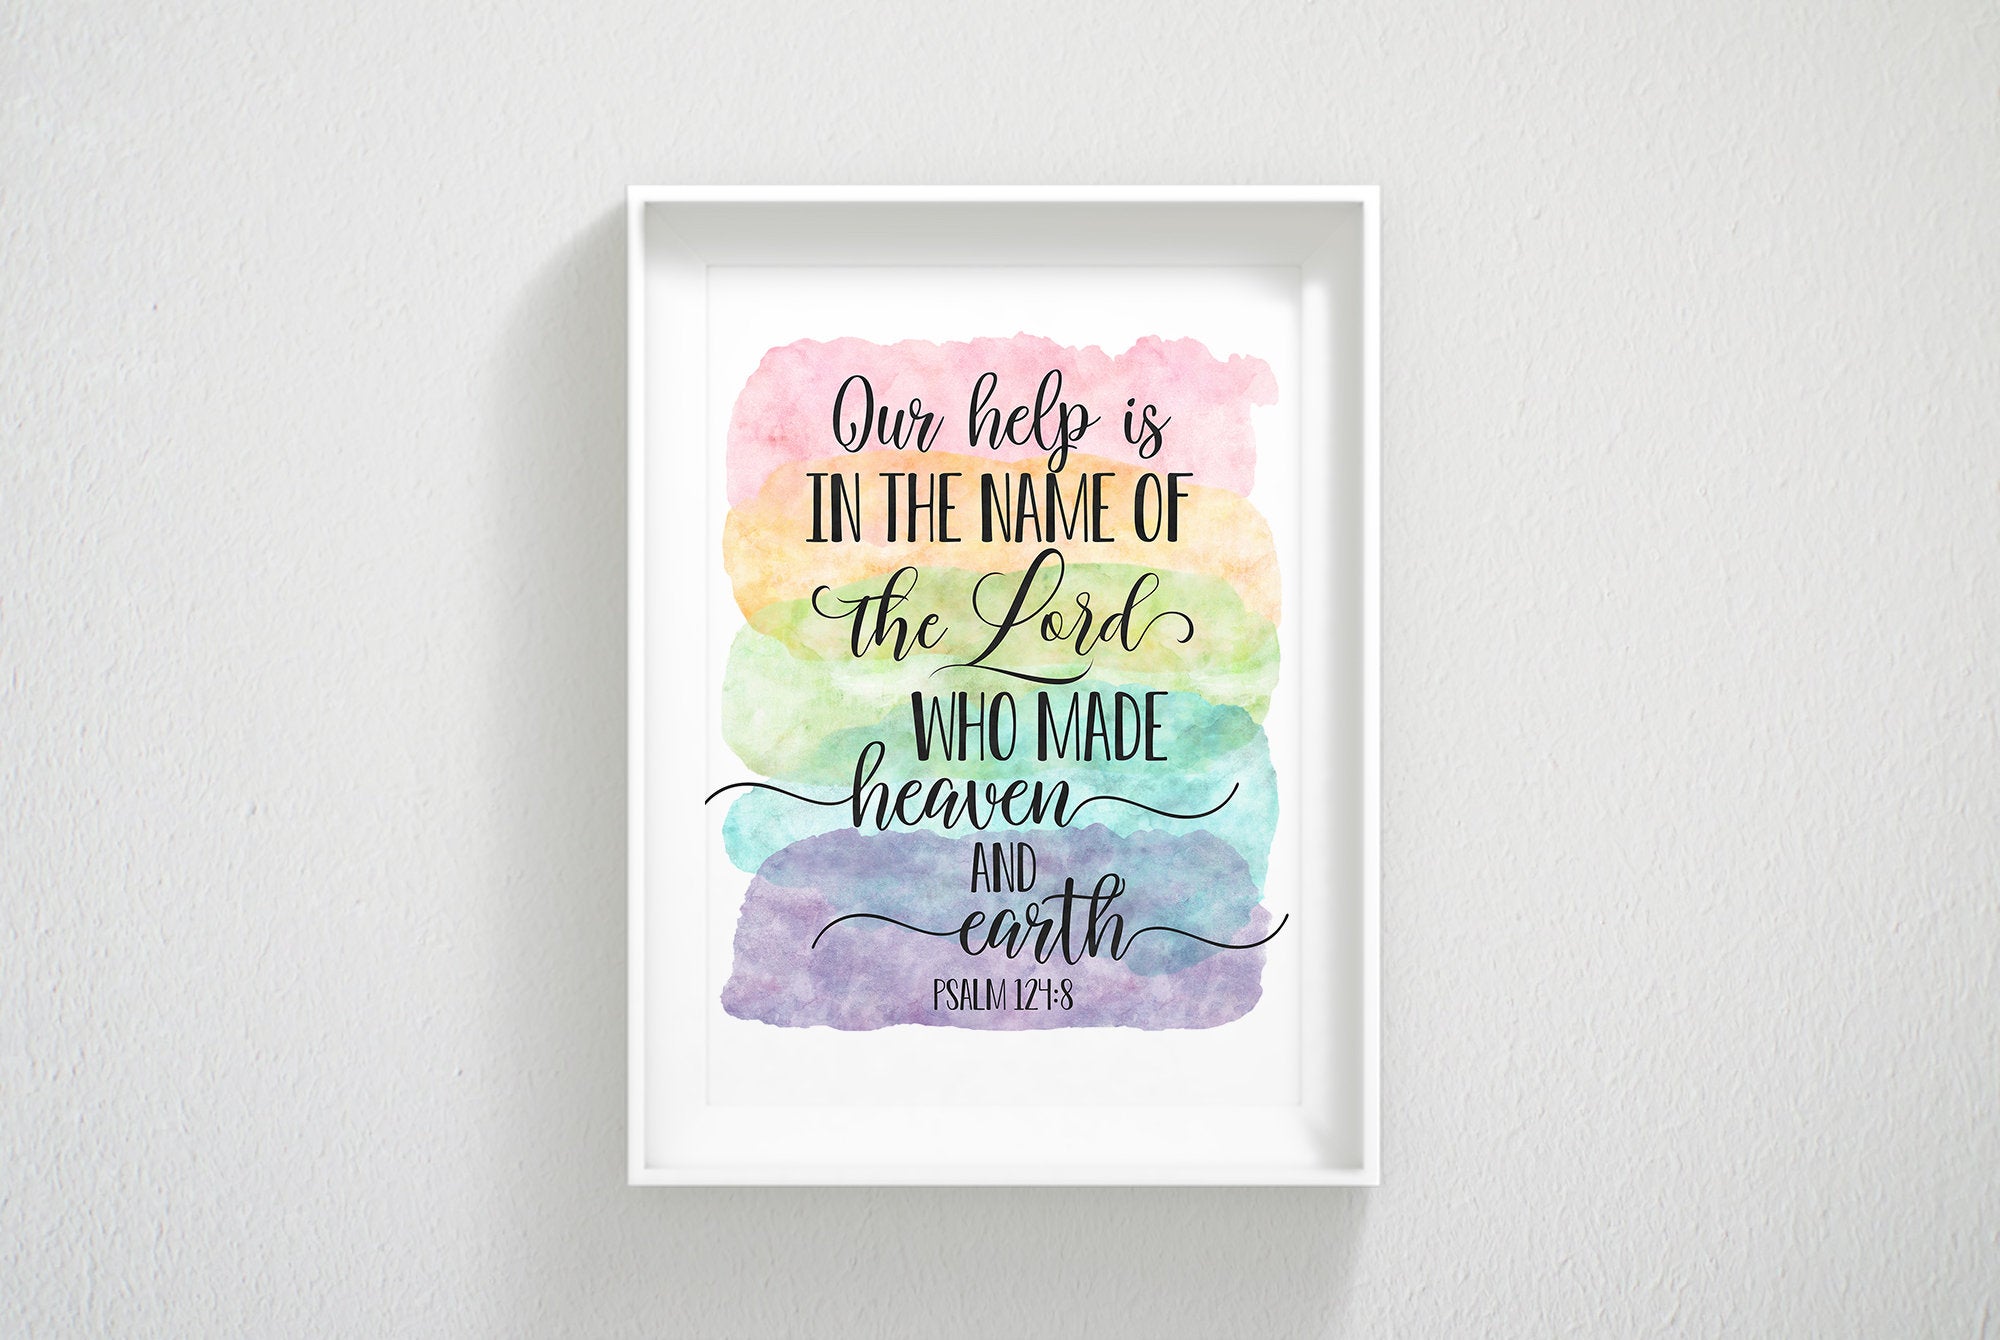 Our Help Is In The Name Of The Lord, Psalm 124:8, Catholic Prayer, Bible Verse Printable Wall Art